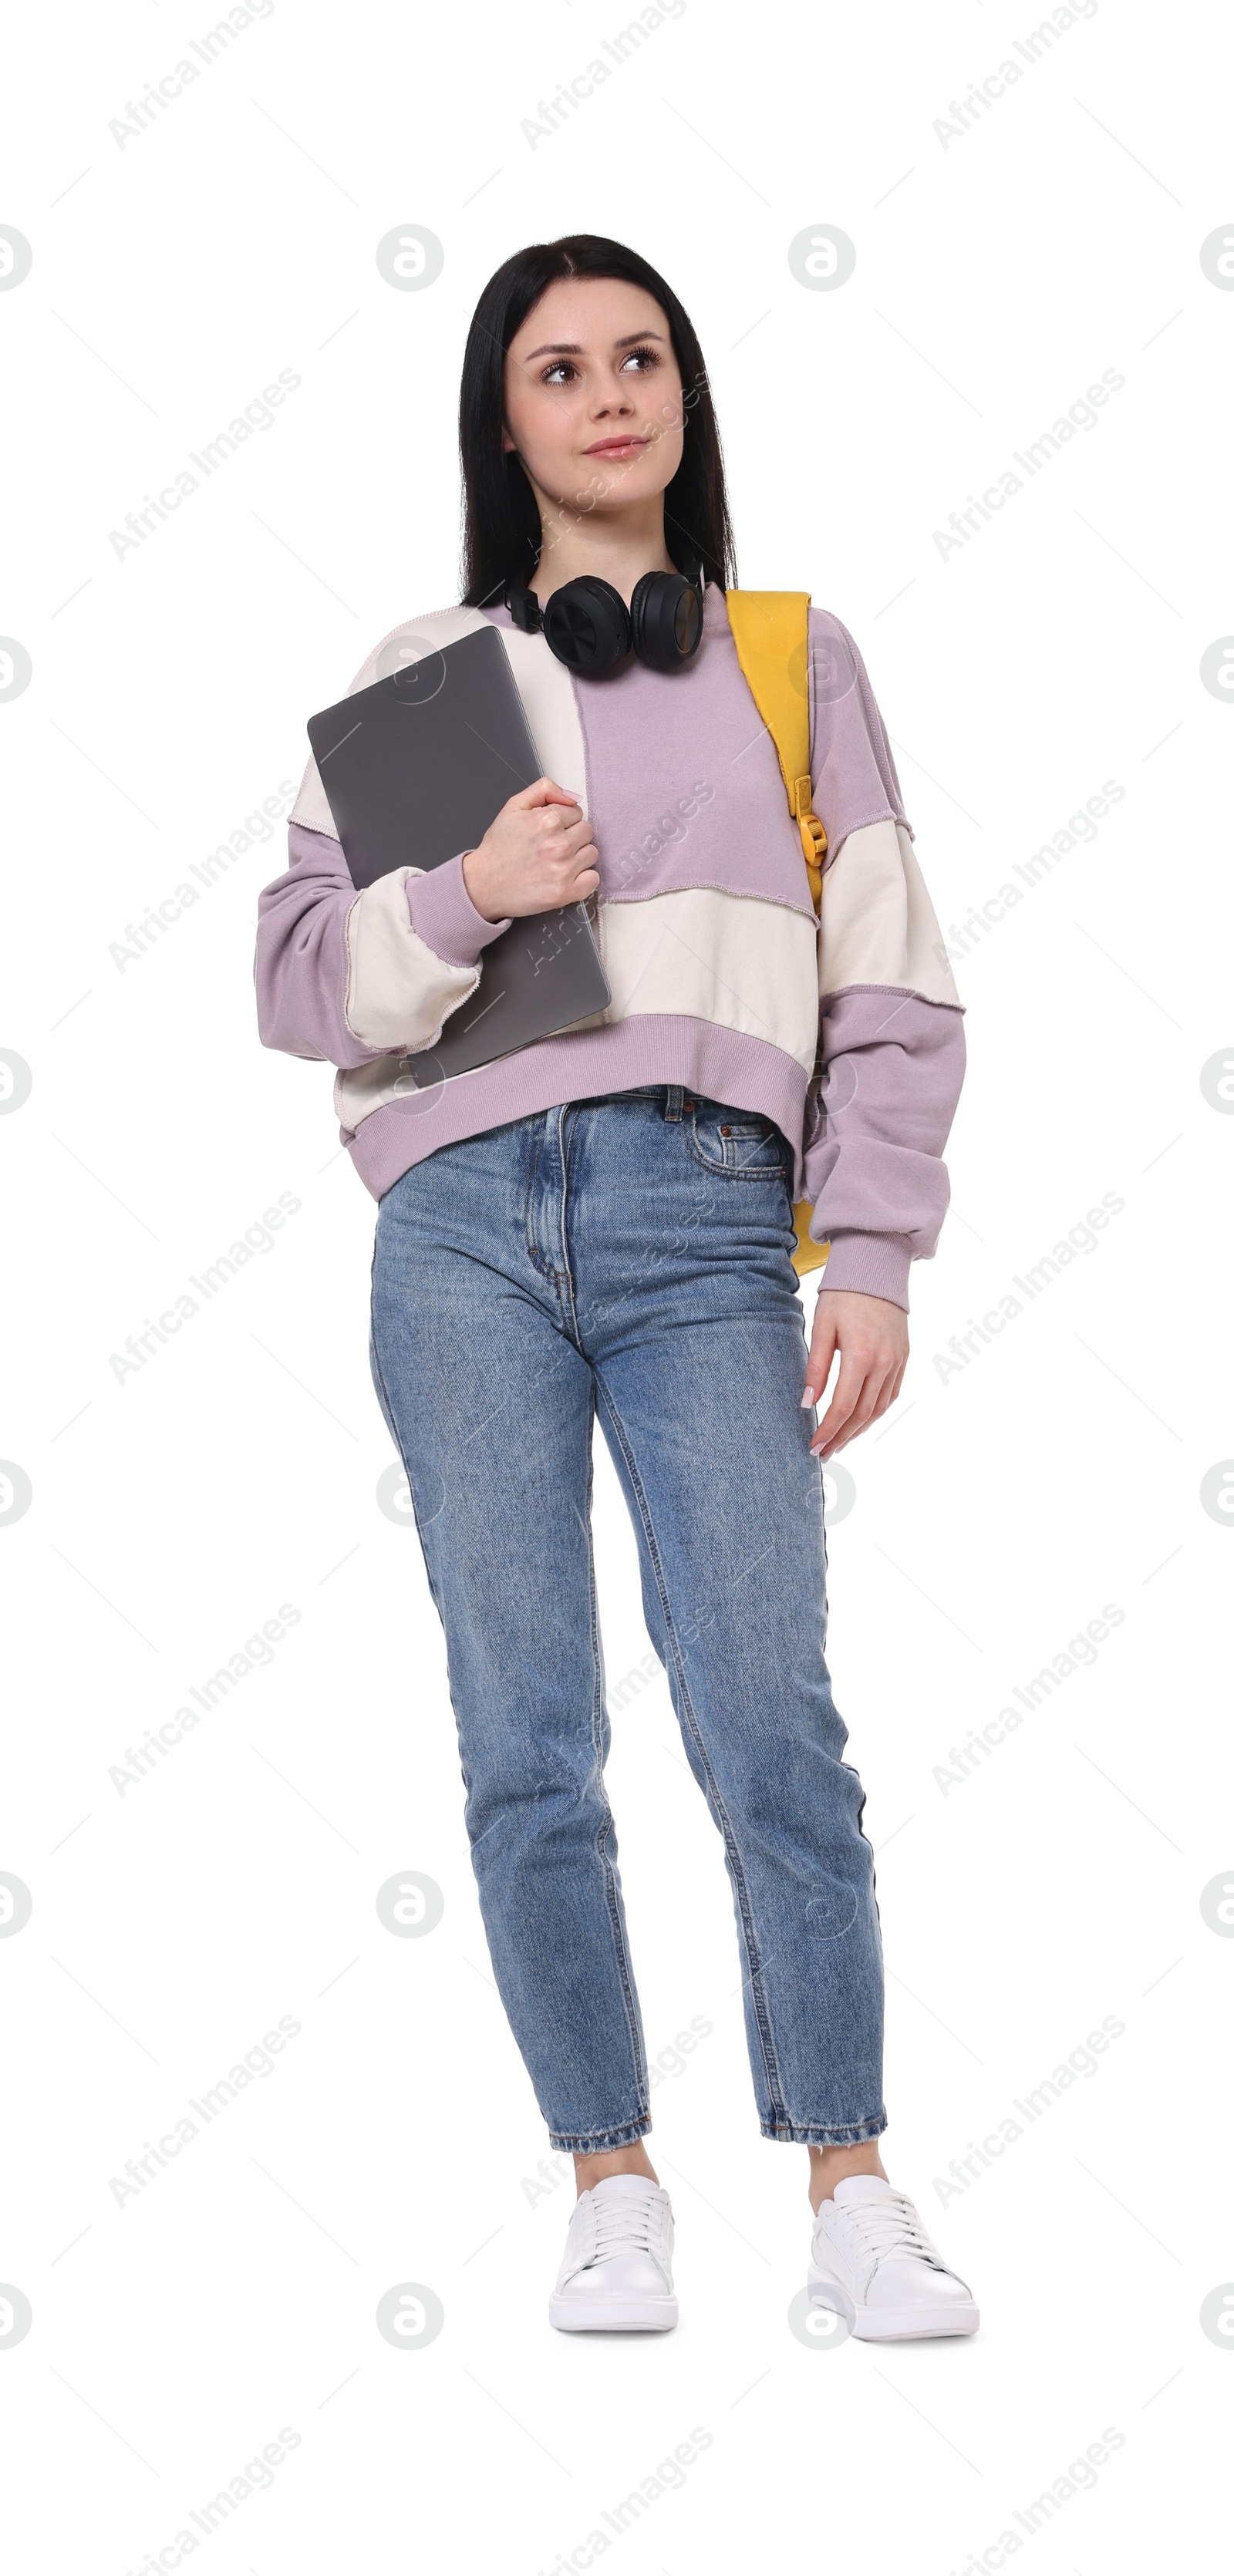 Photo of Student with backpack and laptop on white background